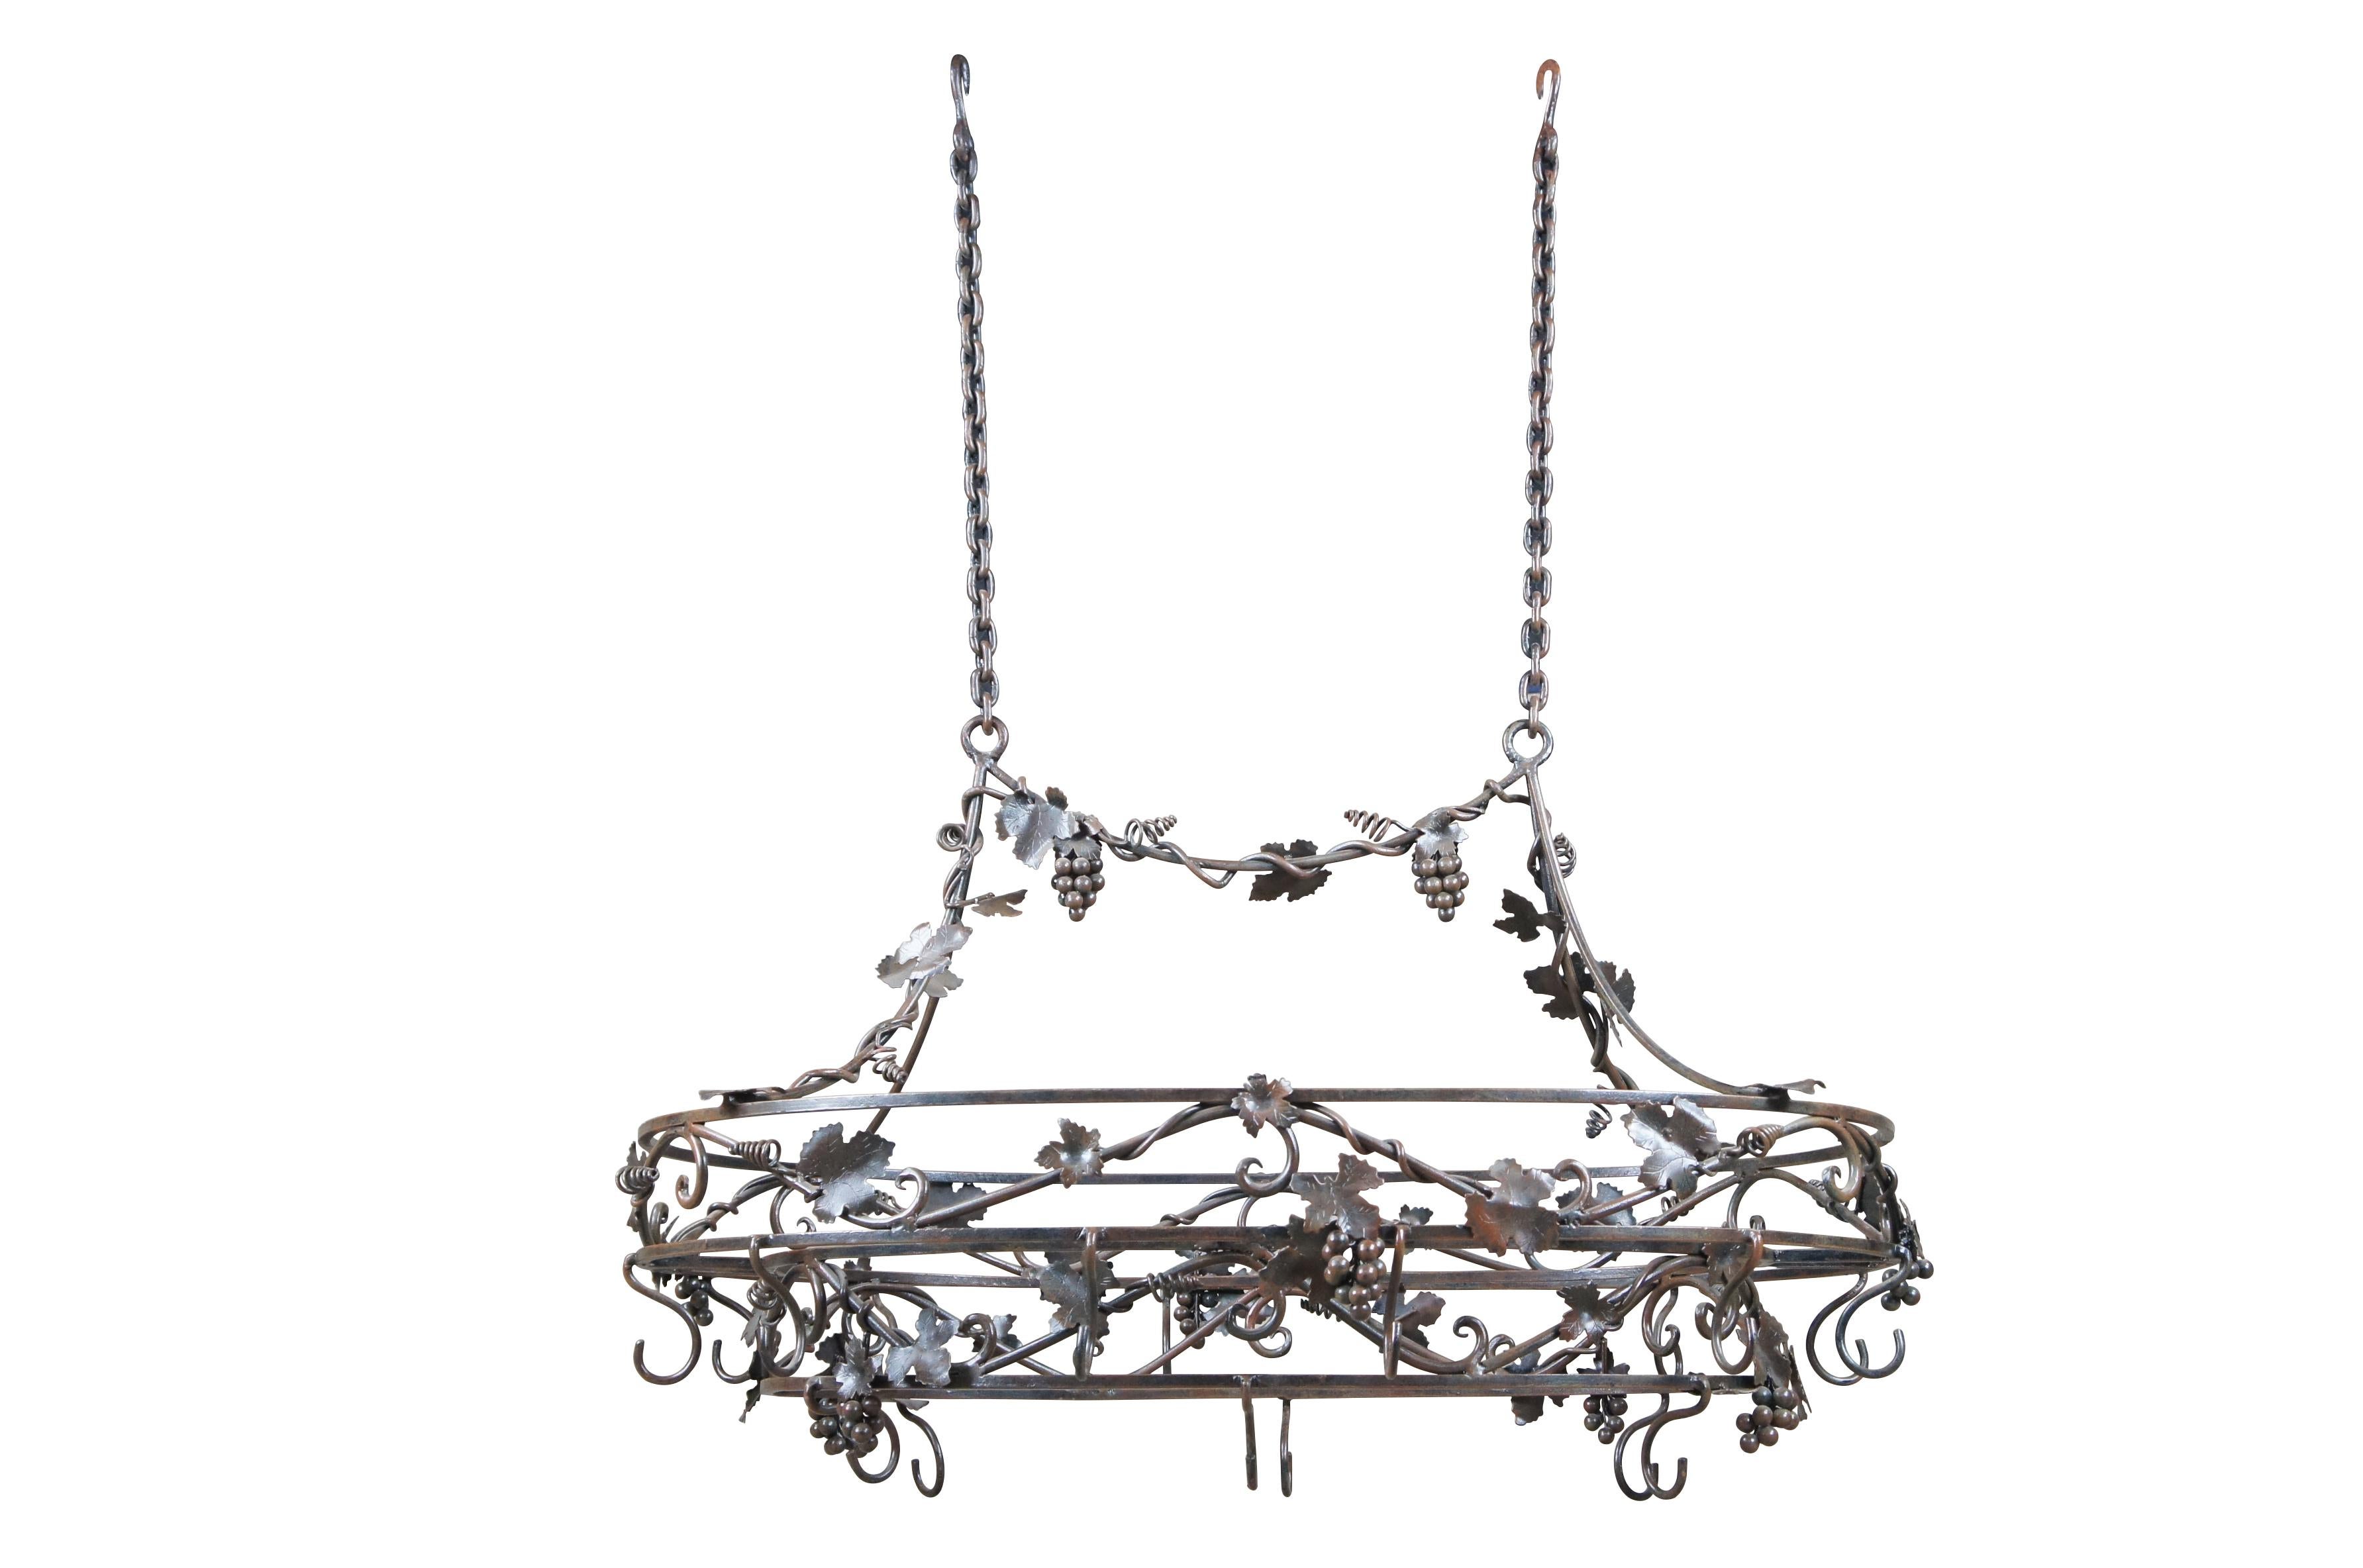 Late 20th century wrought iron pot rack featuring Tuscan grapevine and leaf / wine / Vineyard theme with stunning detail.  Made in the Philippines. 

Dimensions:
52